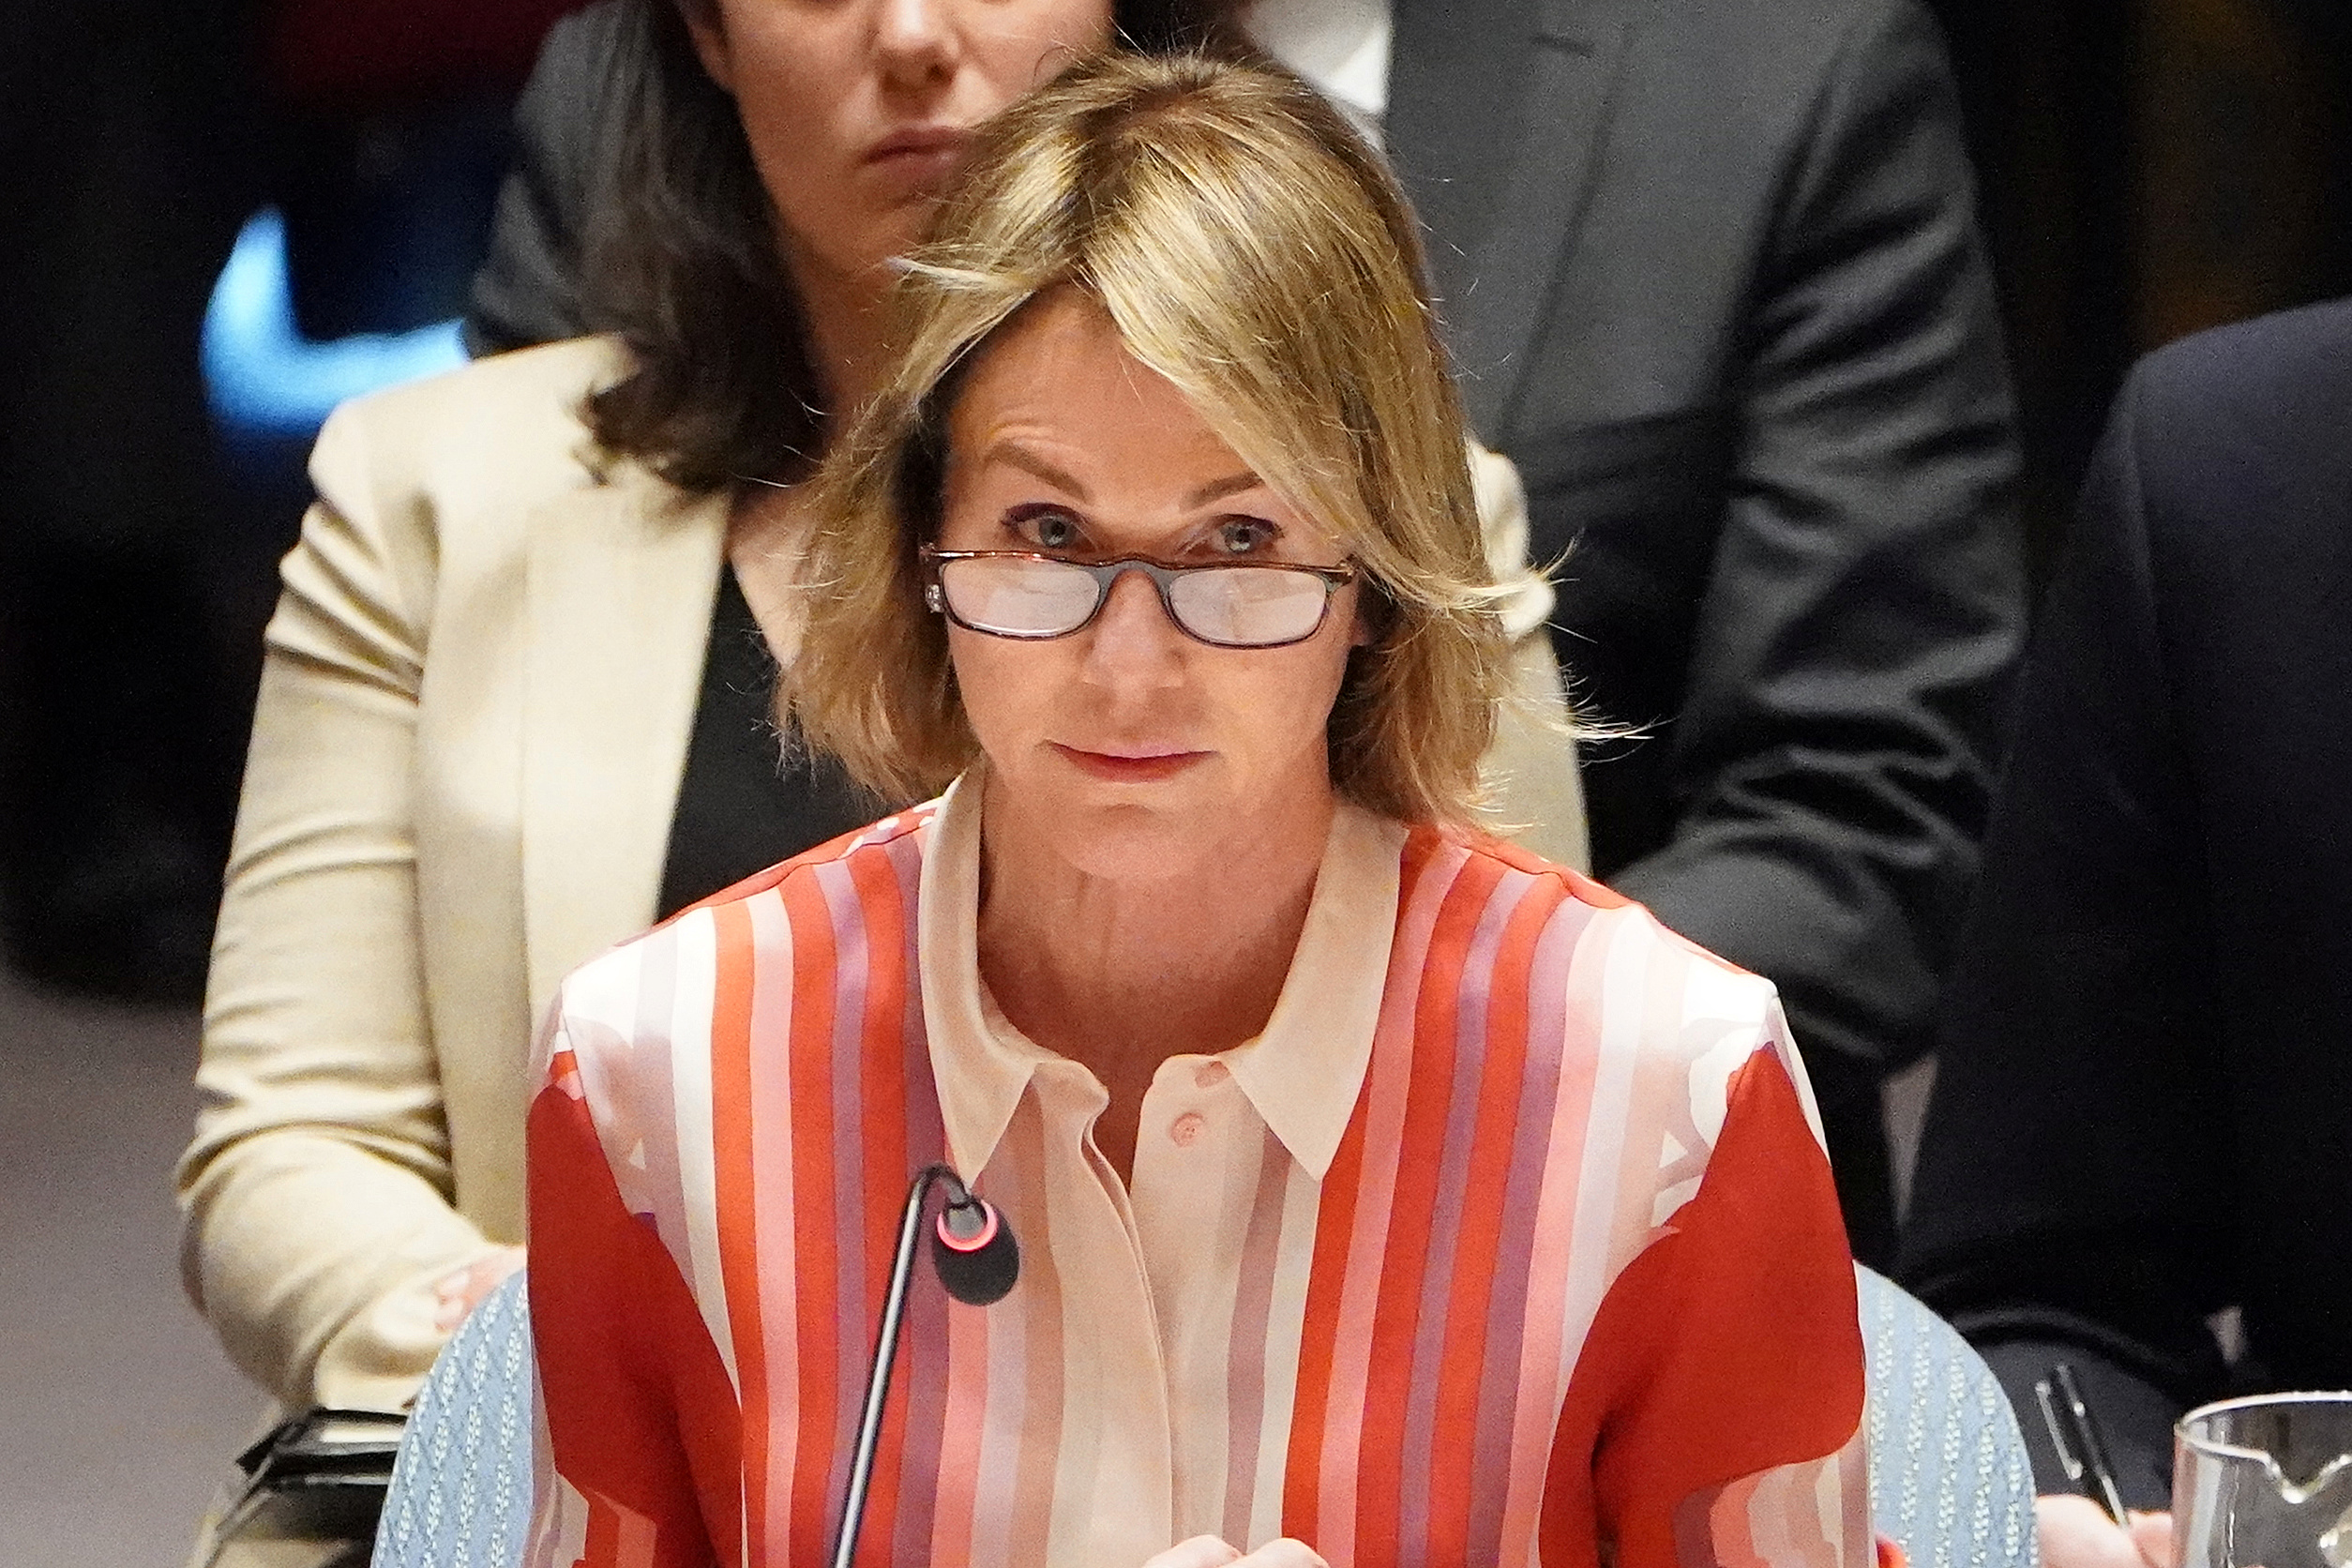 U.S. Ambassador to UN Craft attends Security Council meeting about situation in Syria in New York City